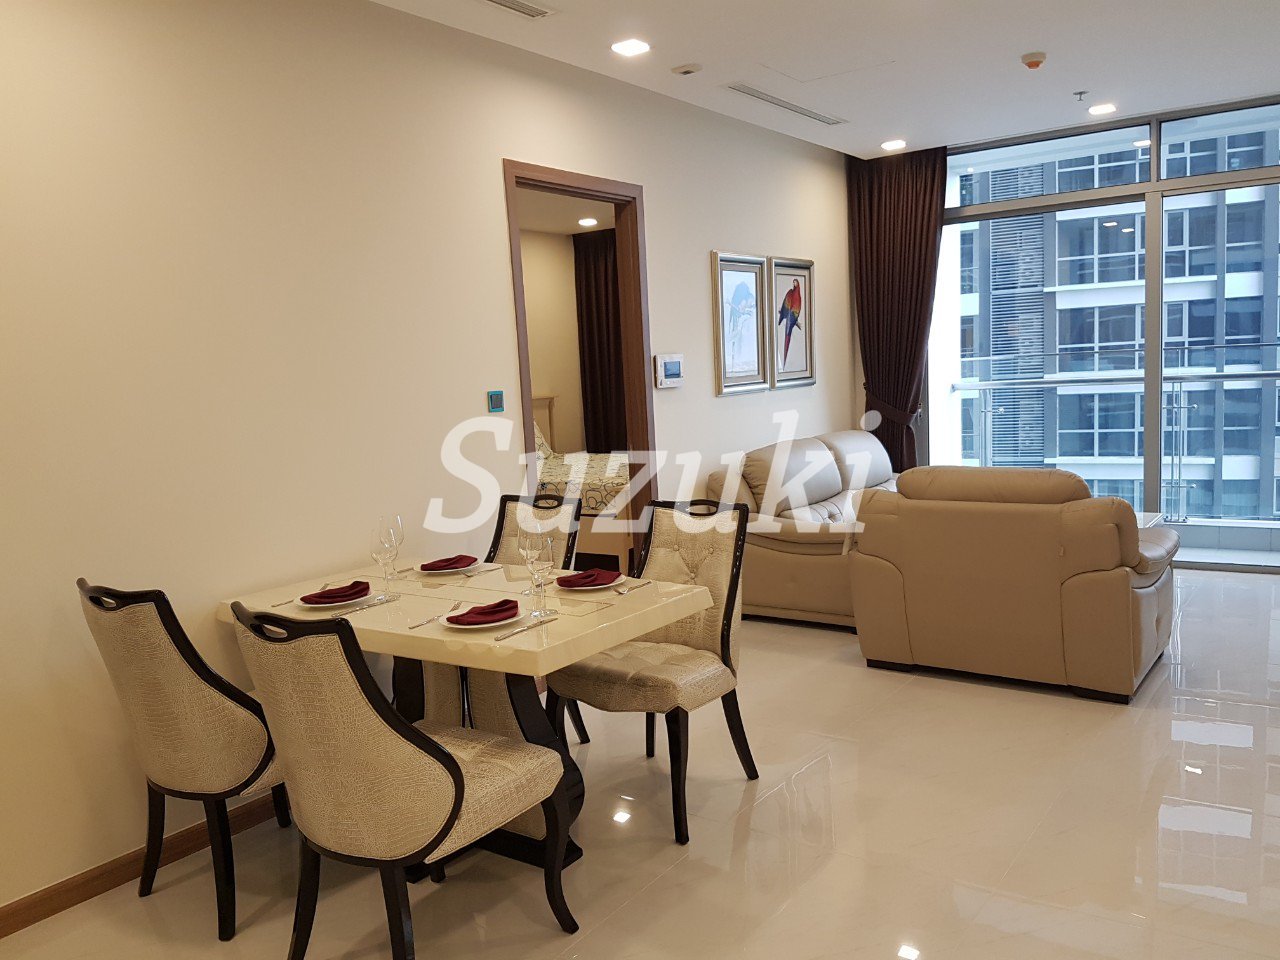 Vinhomes Central Park, a popular apartment among foreigners in Ho Chi Minh | 2LDK rental 82 square meters-1200$-ST105P2678